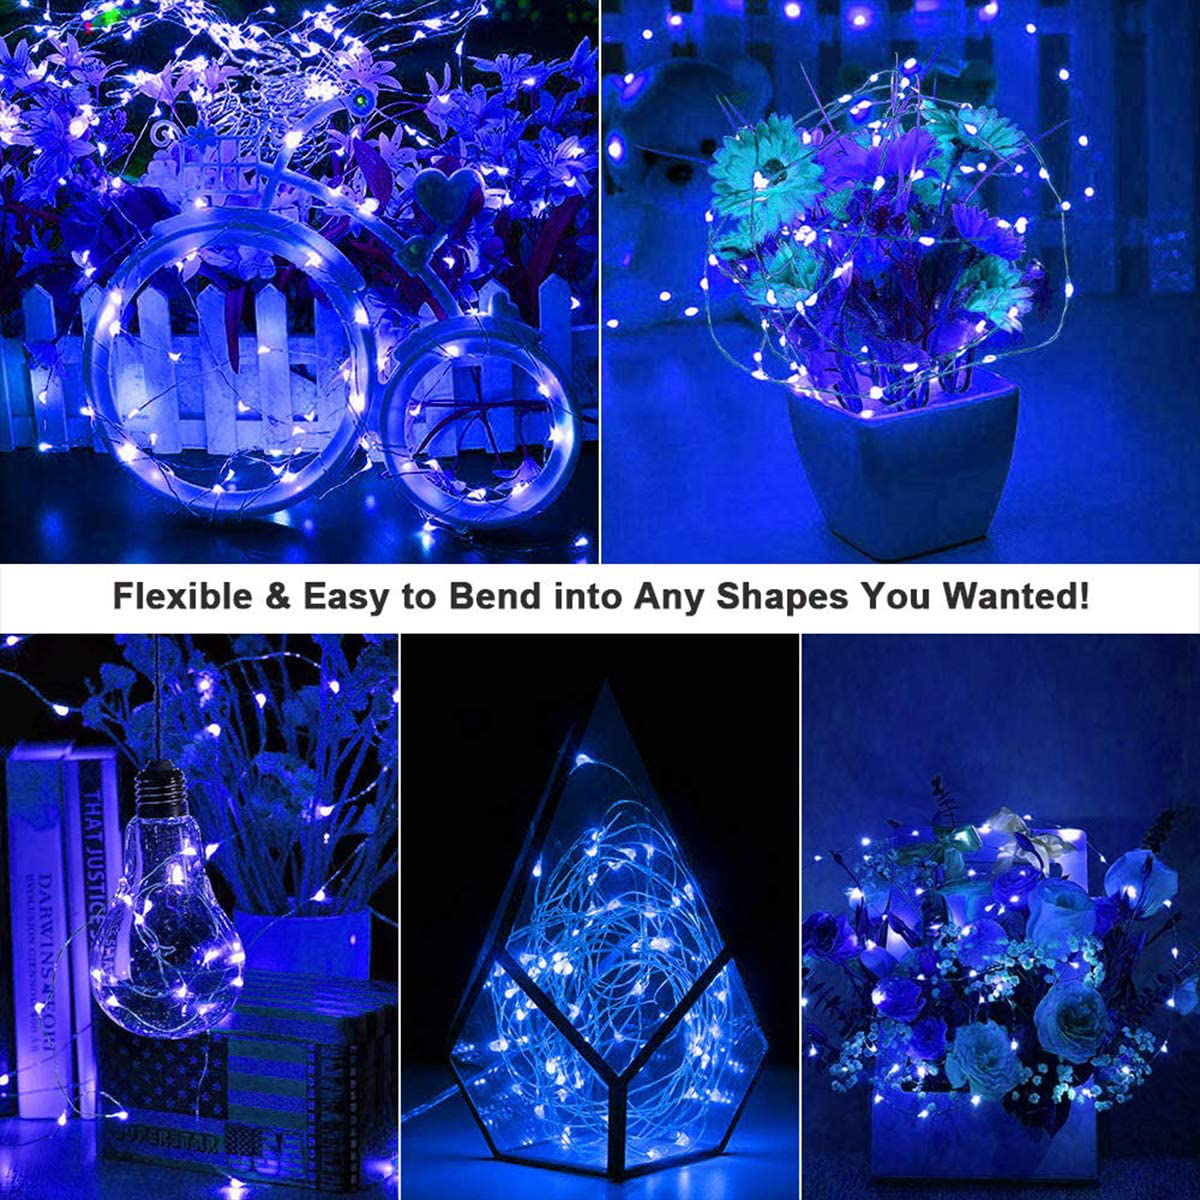 Ariceleo Led Fairy Lights Battery Operated, 2 Packs Mini Battery Powered Copper Wire Starry Fairy Lights for Bedroom, Christmas, Parties, Wedding, Centerpiece, Decoration (5m/16ft Multi-Colored)